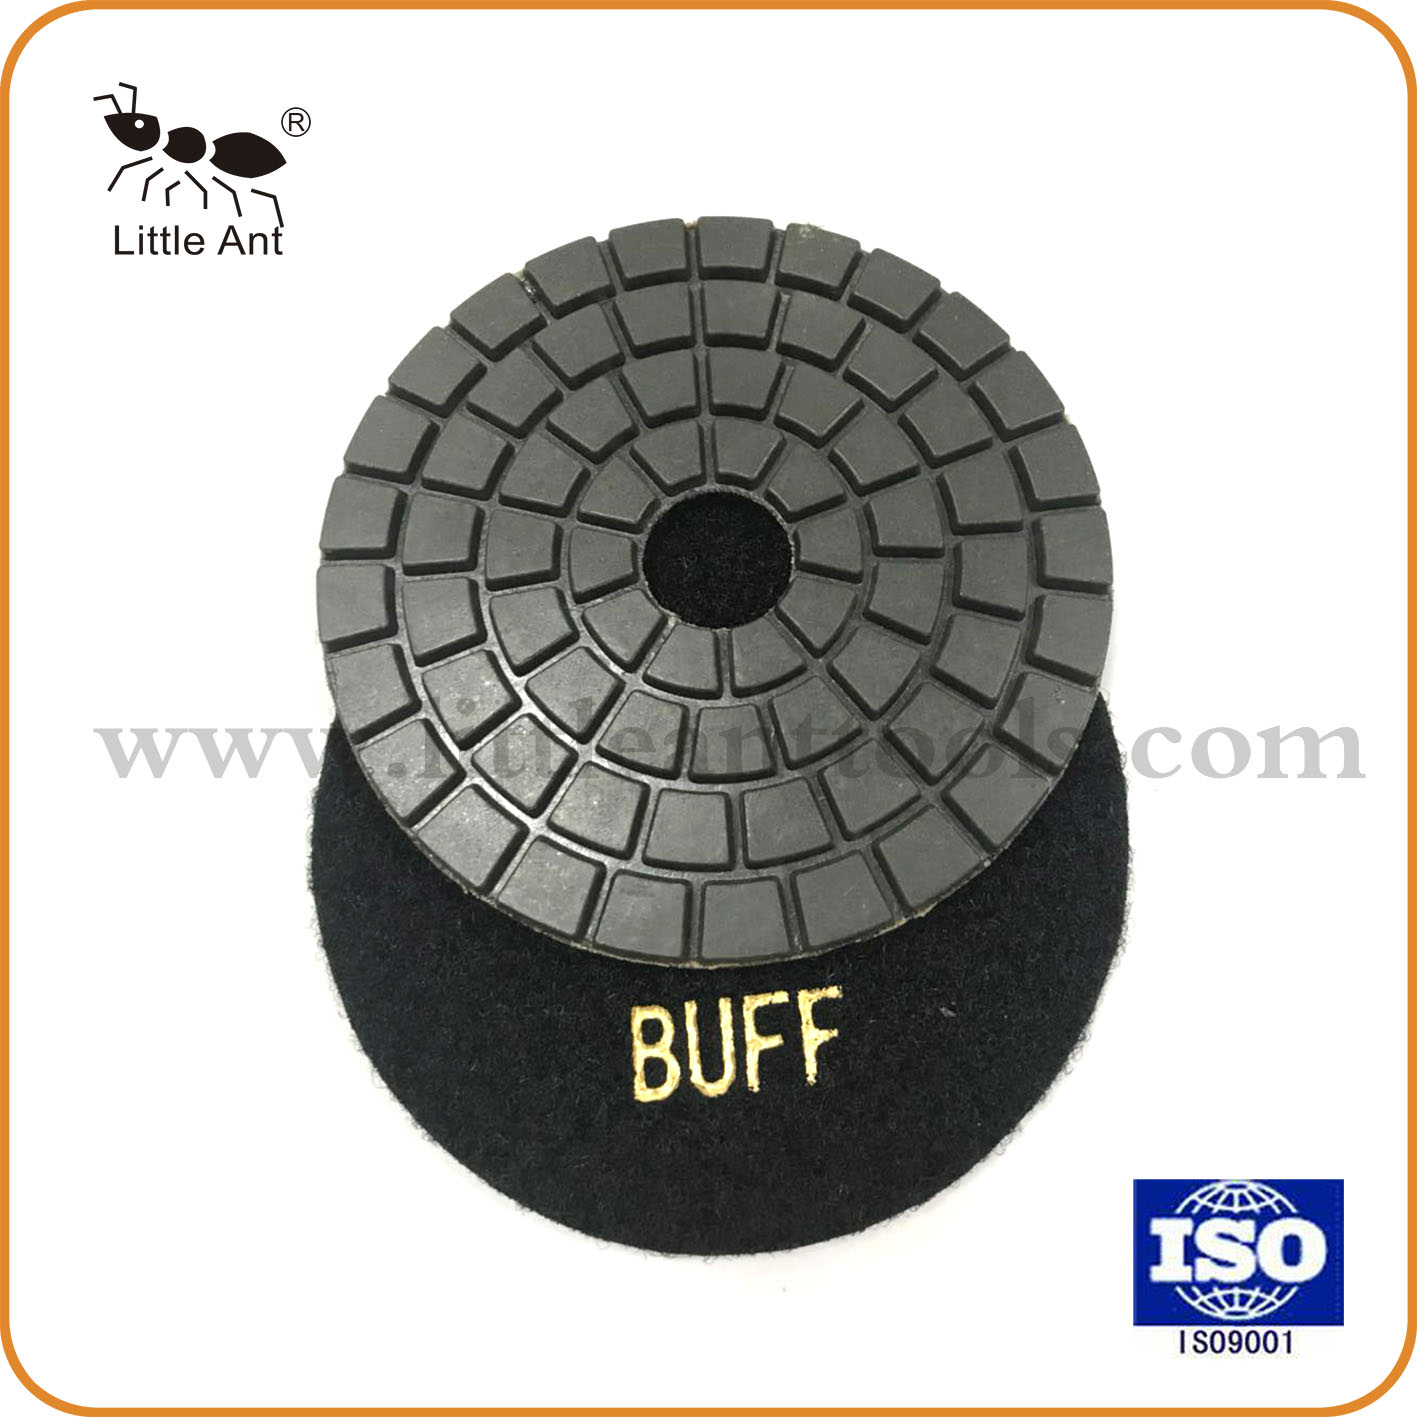 LITTLE ANT Square BUFF Wet Polishing Pads White Or Black for Stone Concrete Air & Electric Polisher 